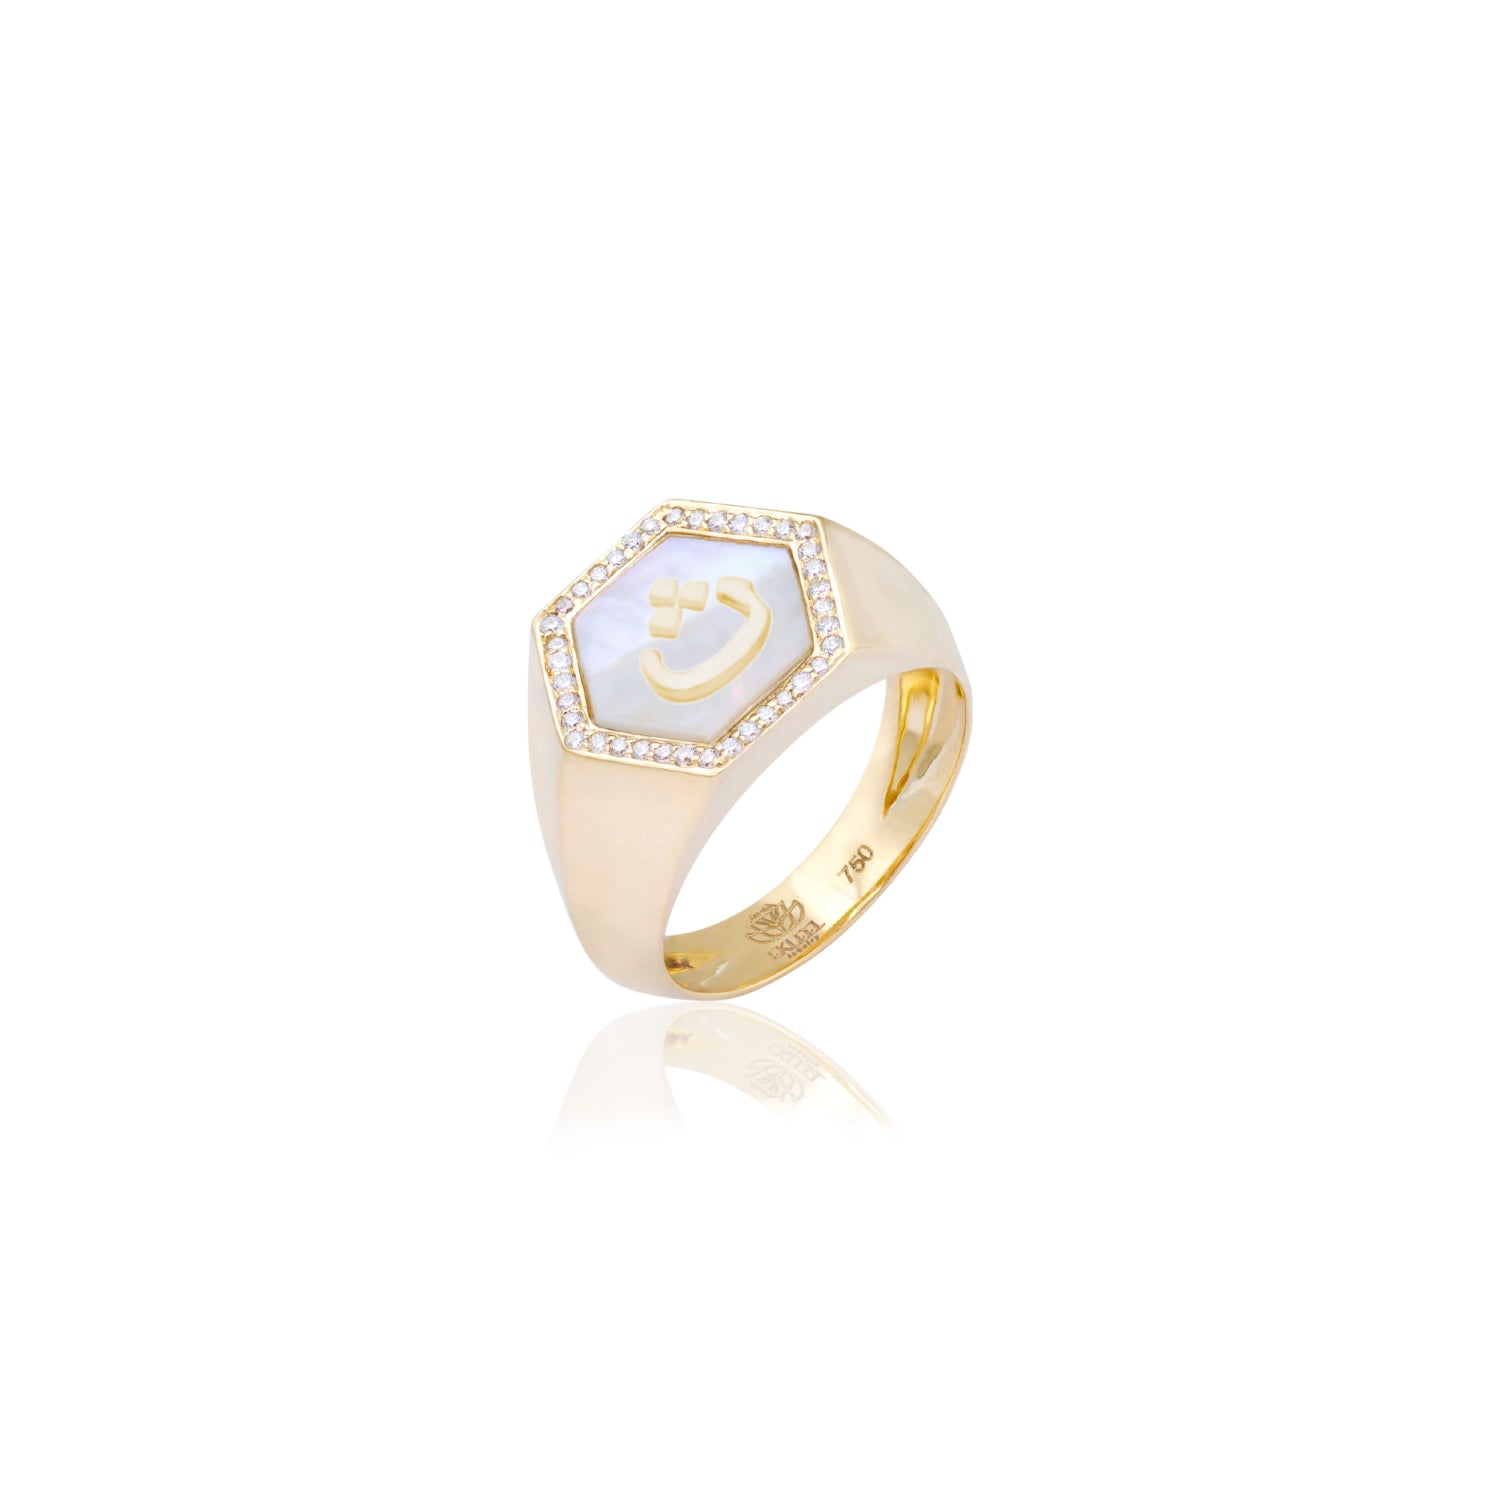 Qamoos 2.0 Letter ث White Mother of Pearl and Diamond Signet Ring in Yellow Gold